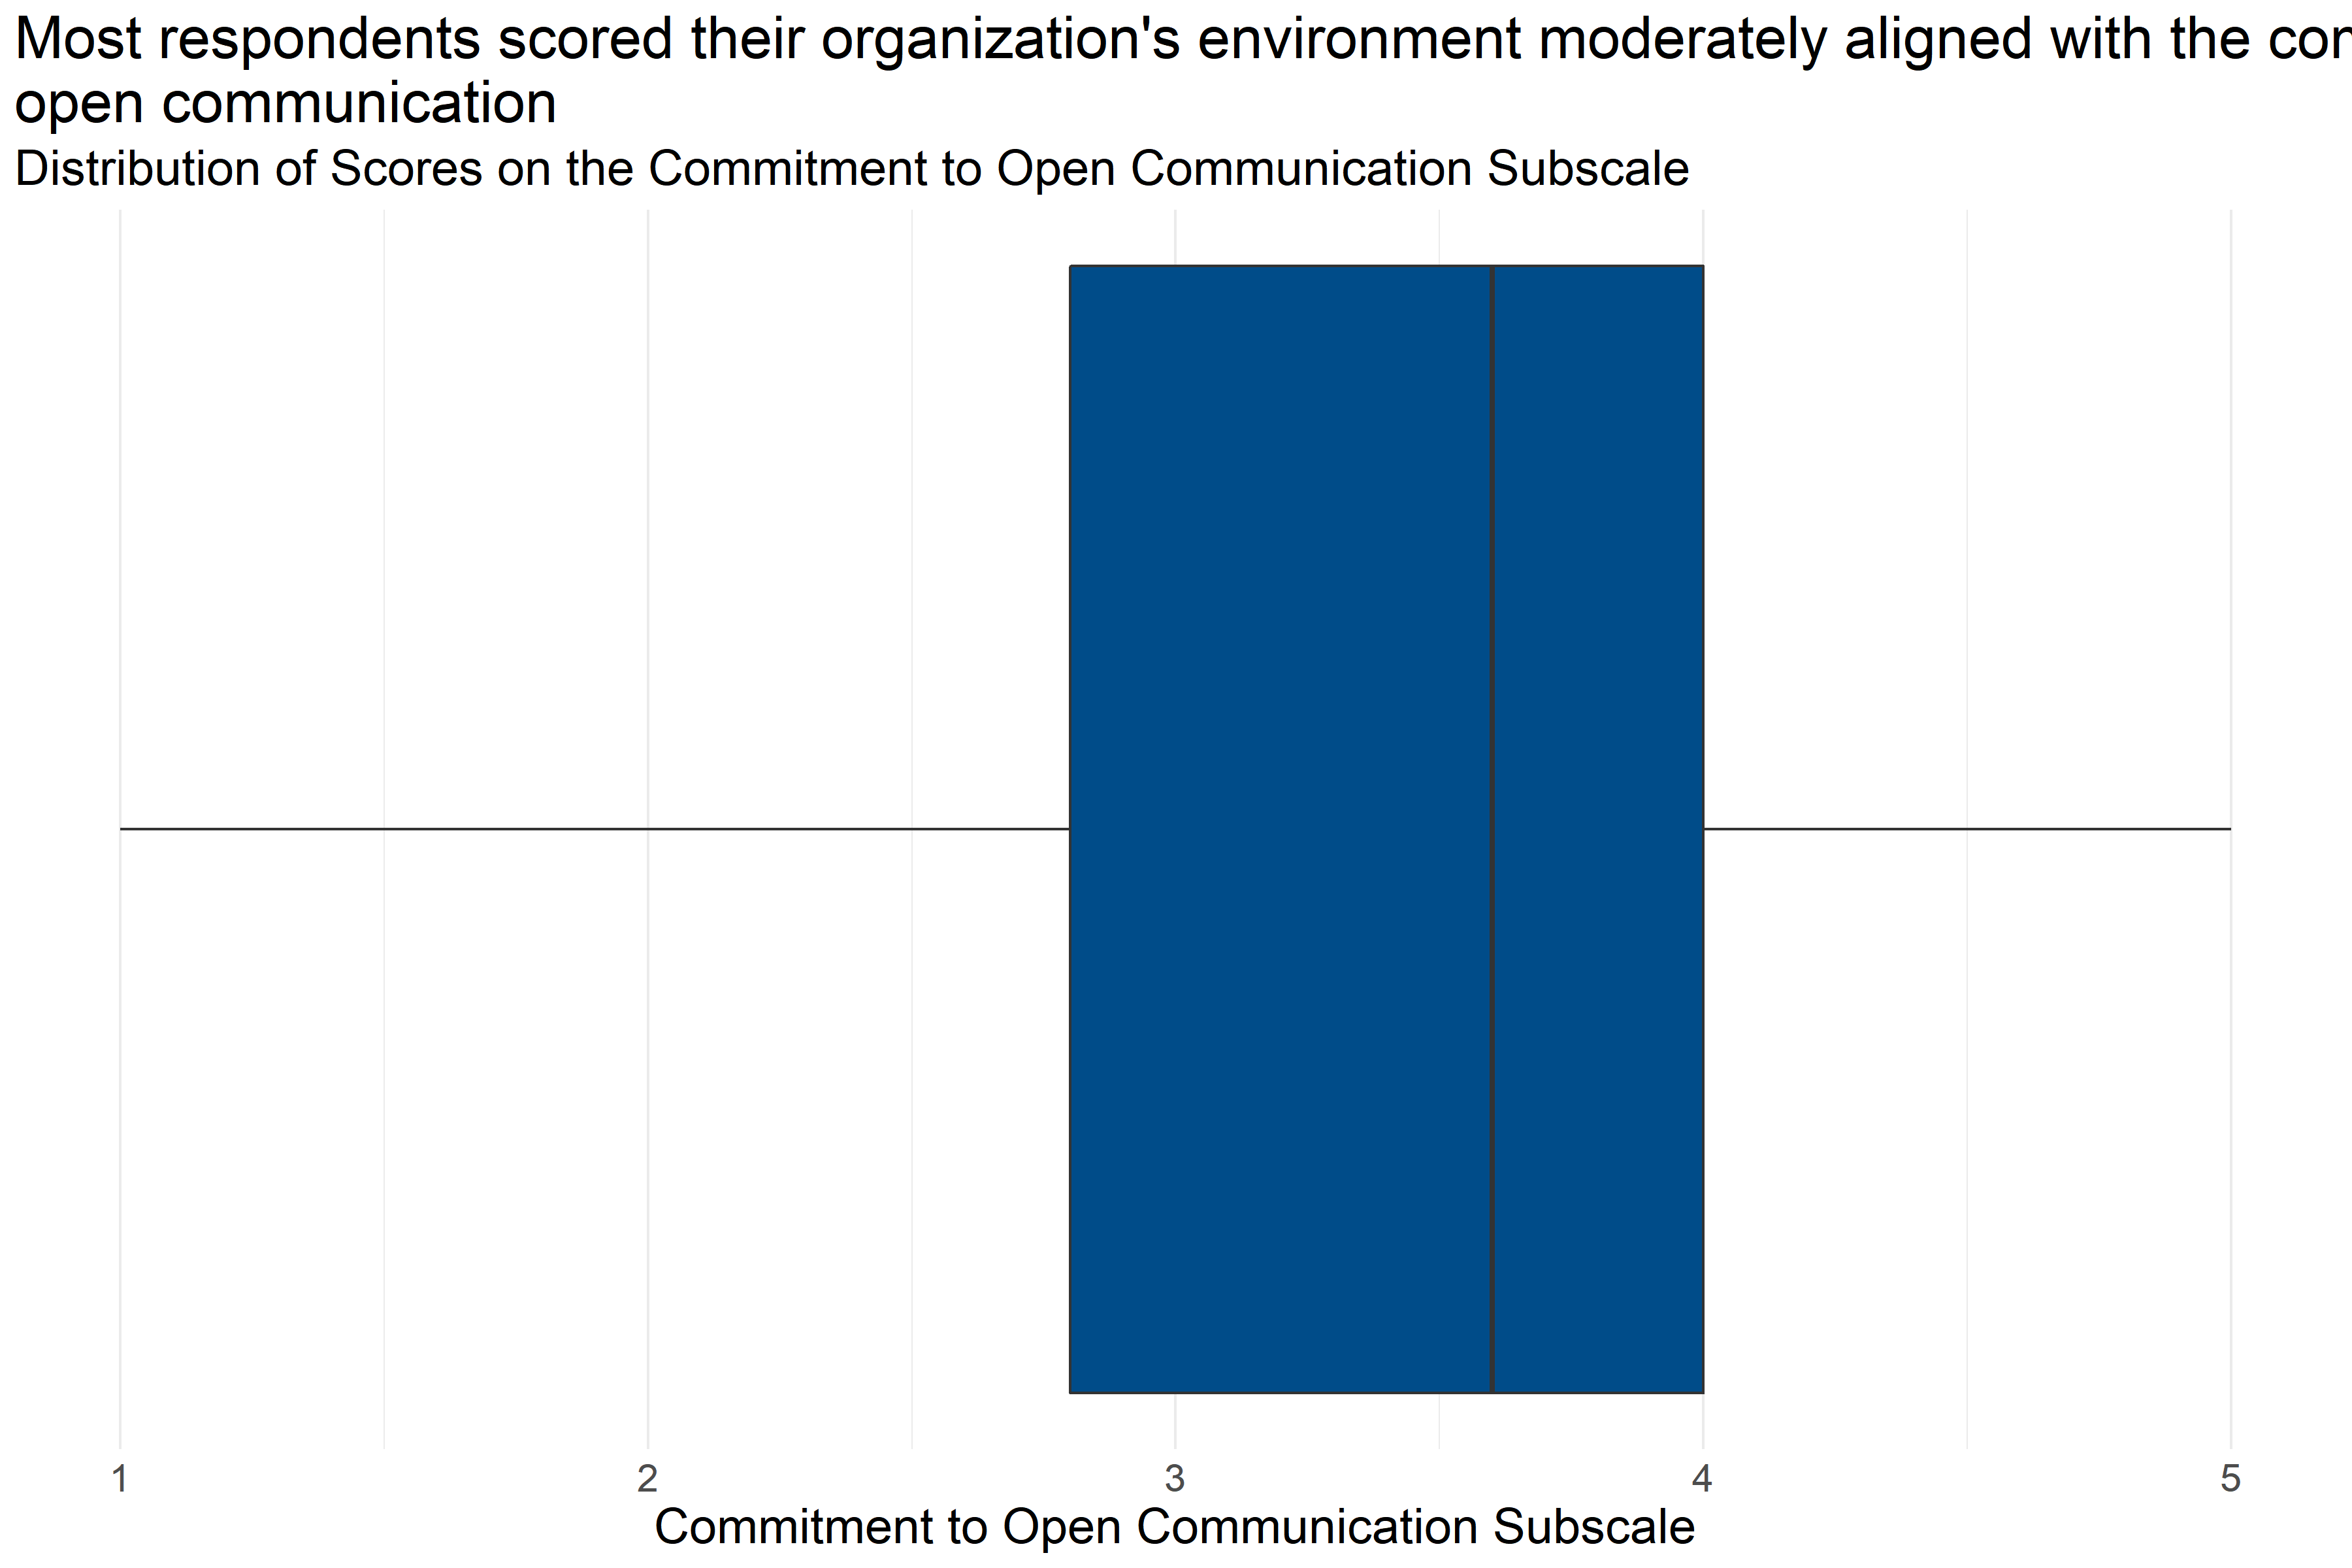 Boxplot of score distributions for Commitment to Open Communication Subscale